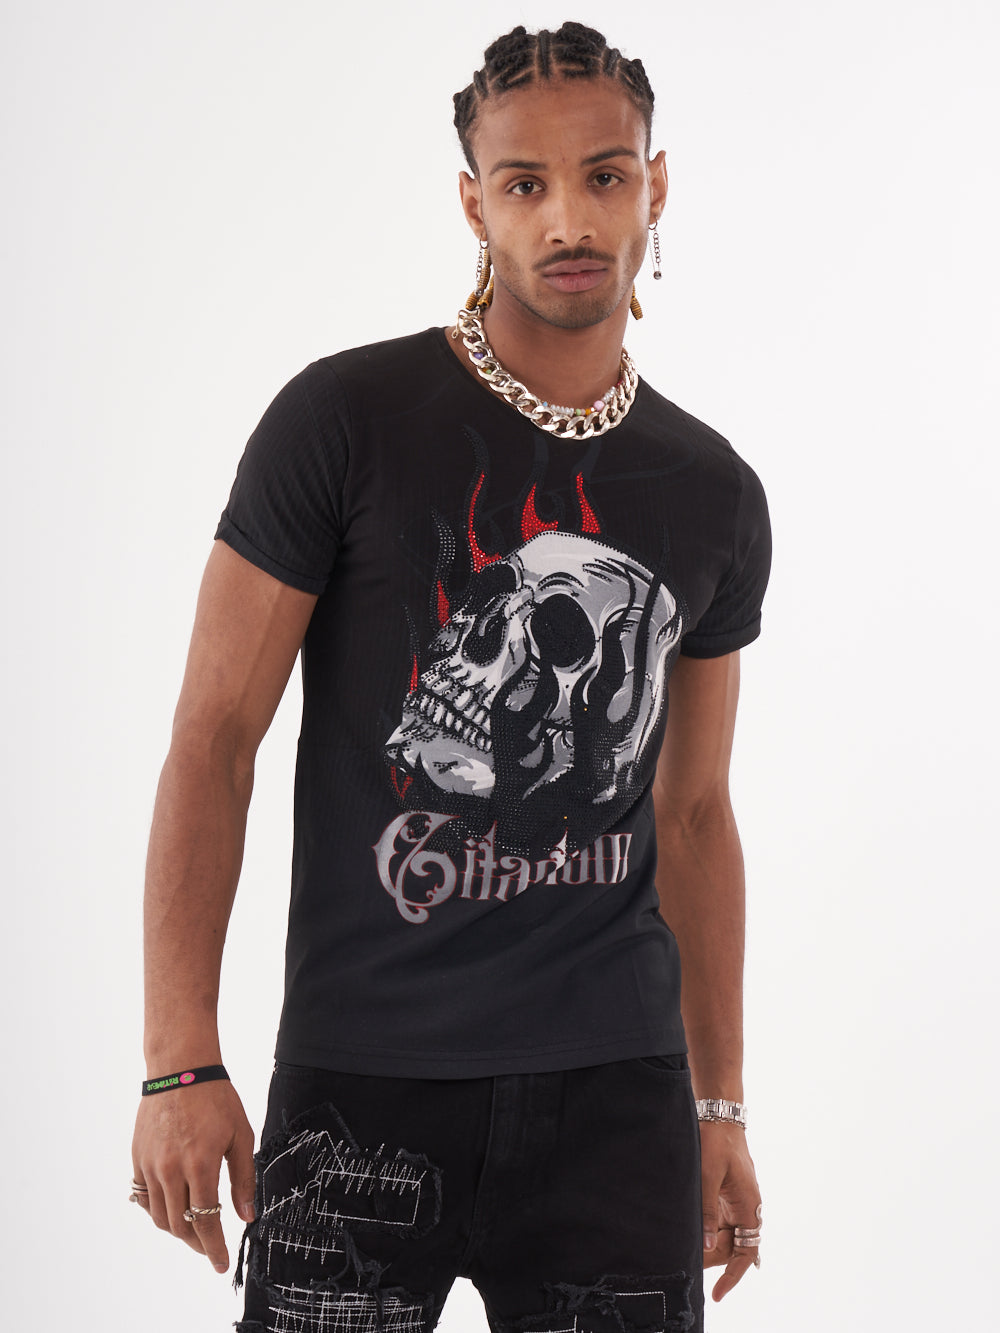 A man sporting a NIRVANA skull-print embellished T-SHIRT in BLACK, paired with patched jeans.